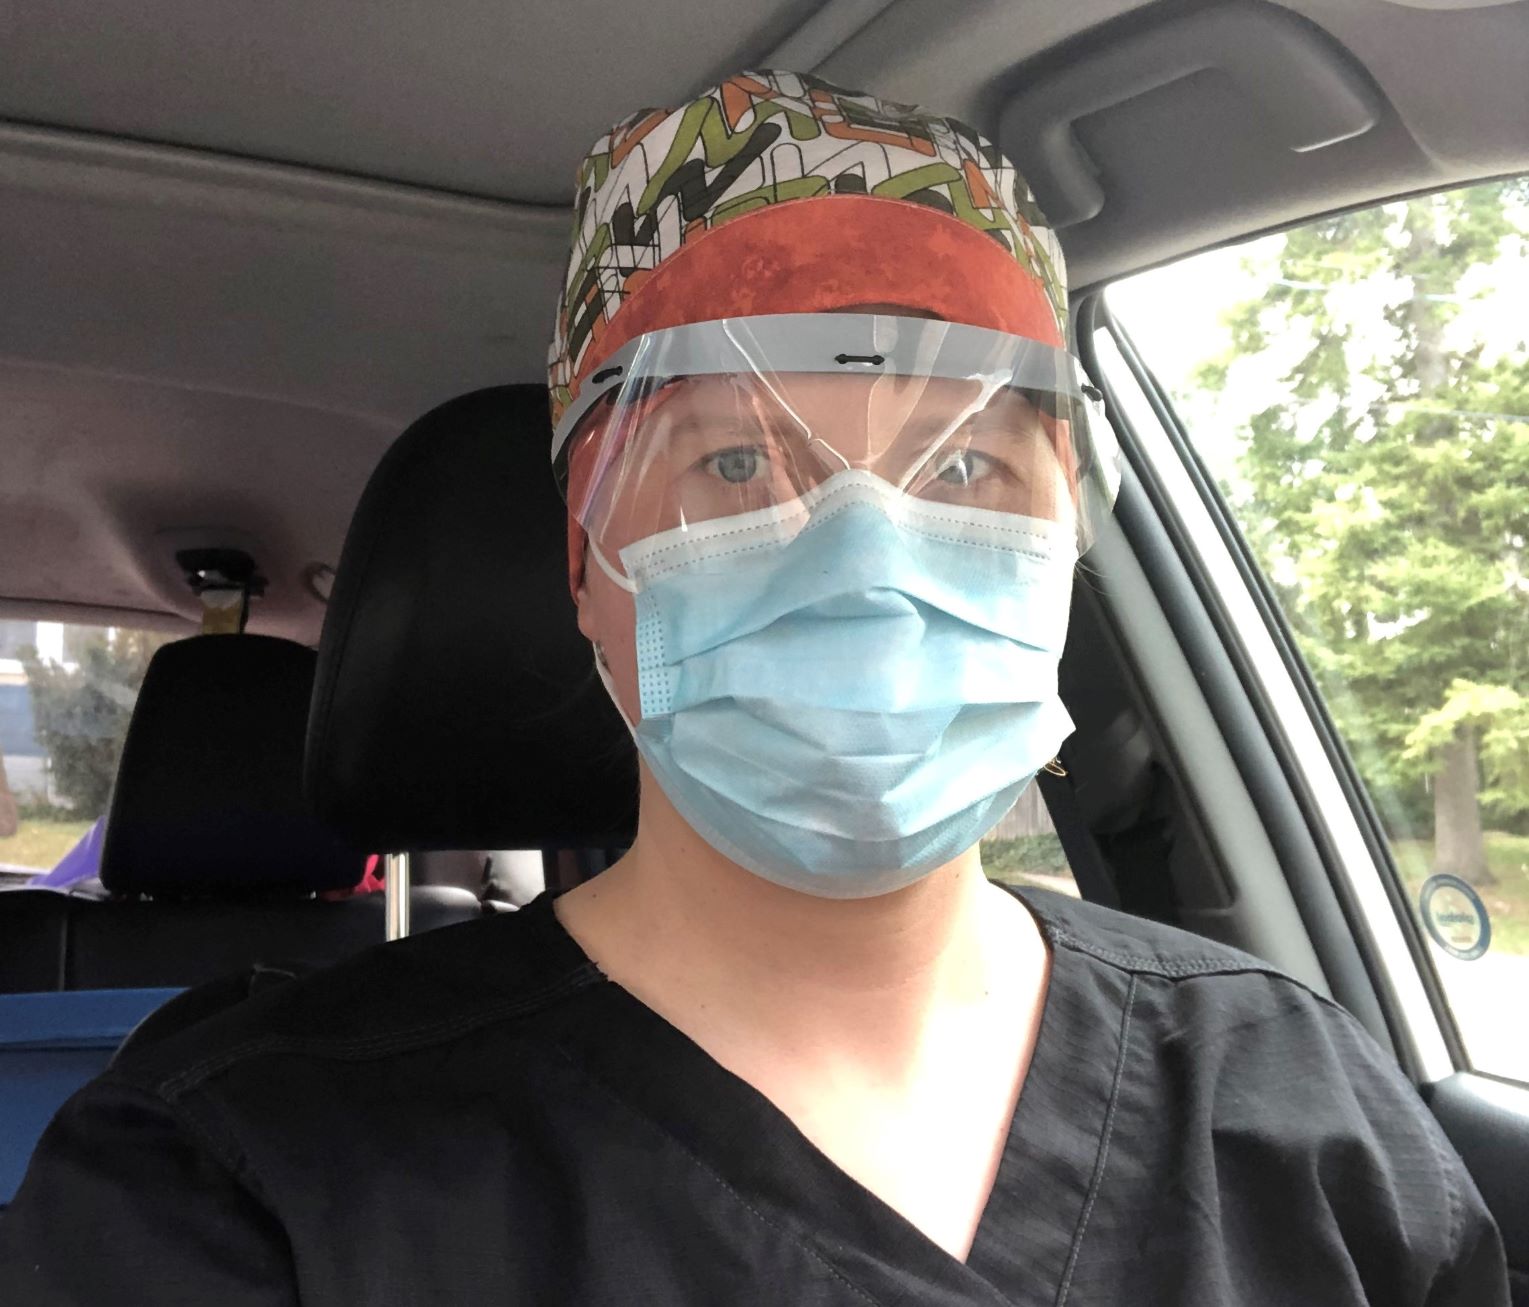 Midwife Ali McCallum wearing personal protective equipment, in her vehicle on route to visit a client at home